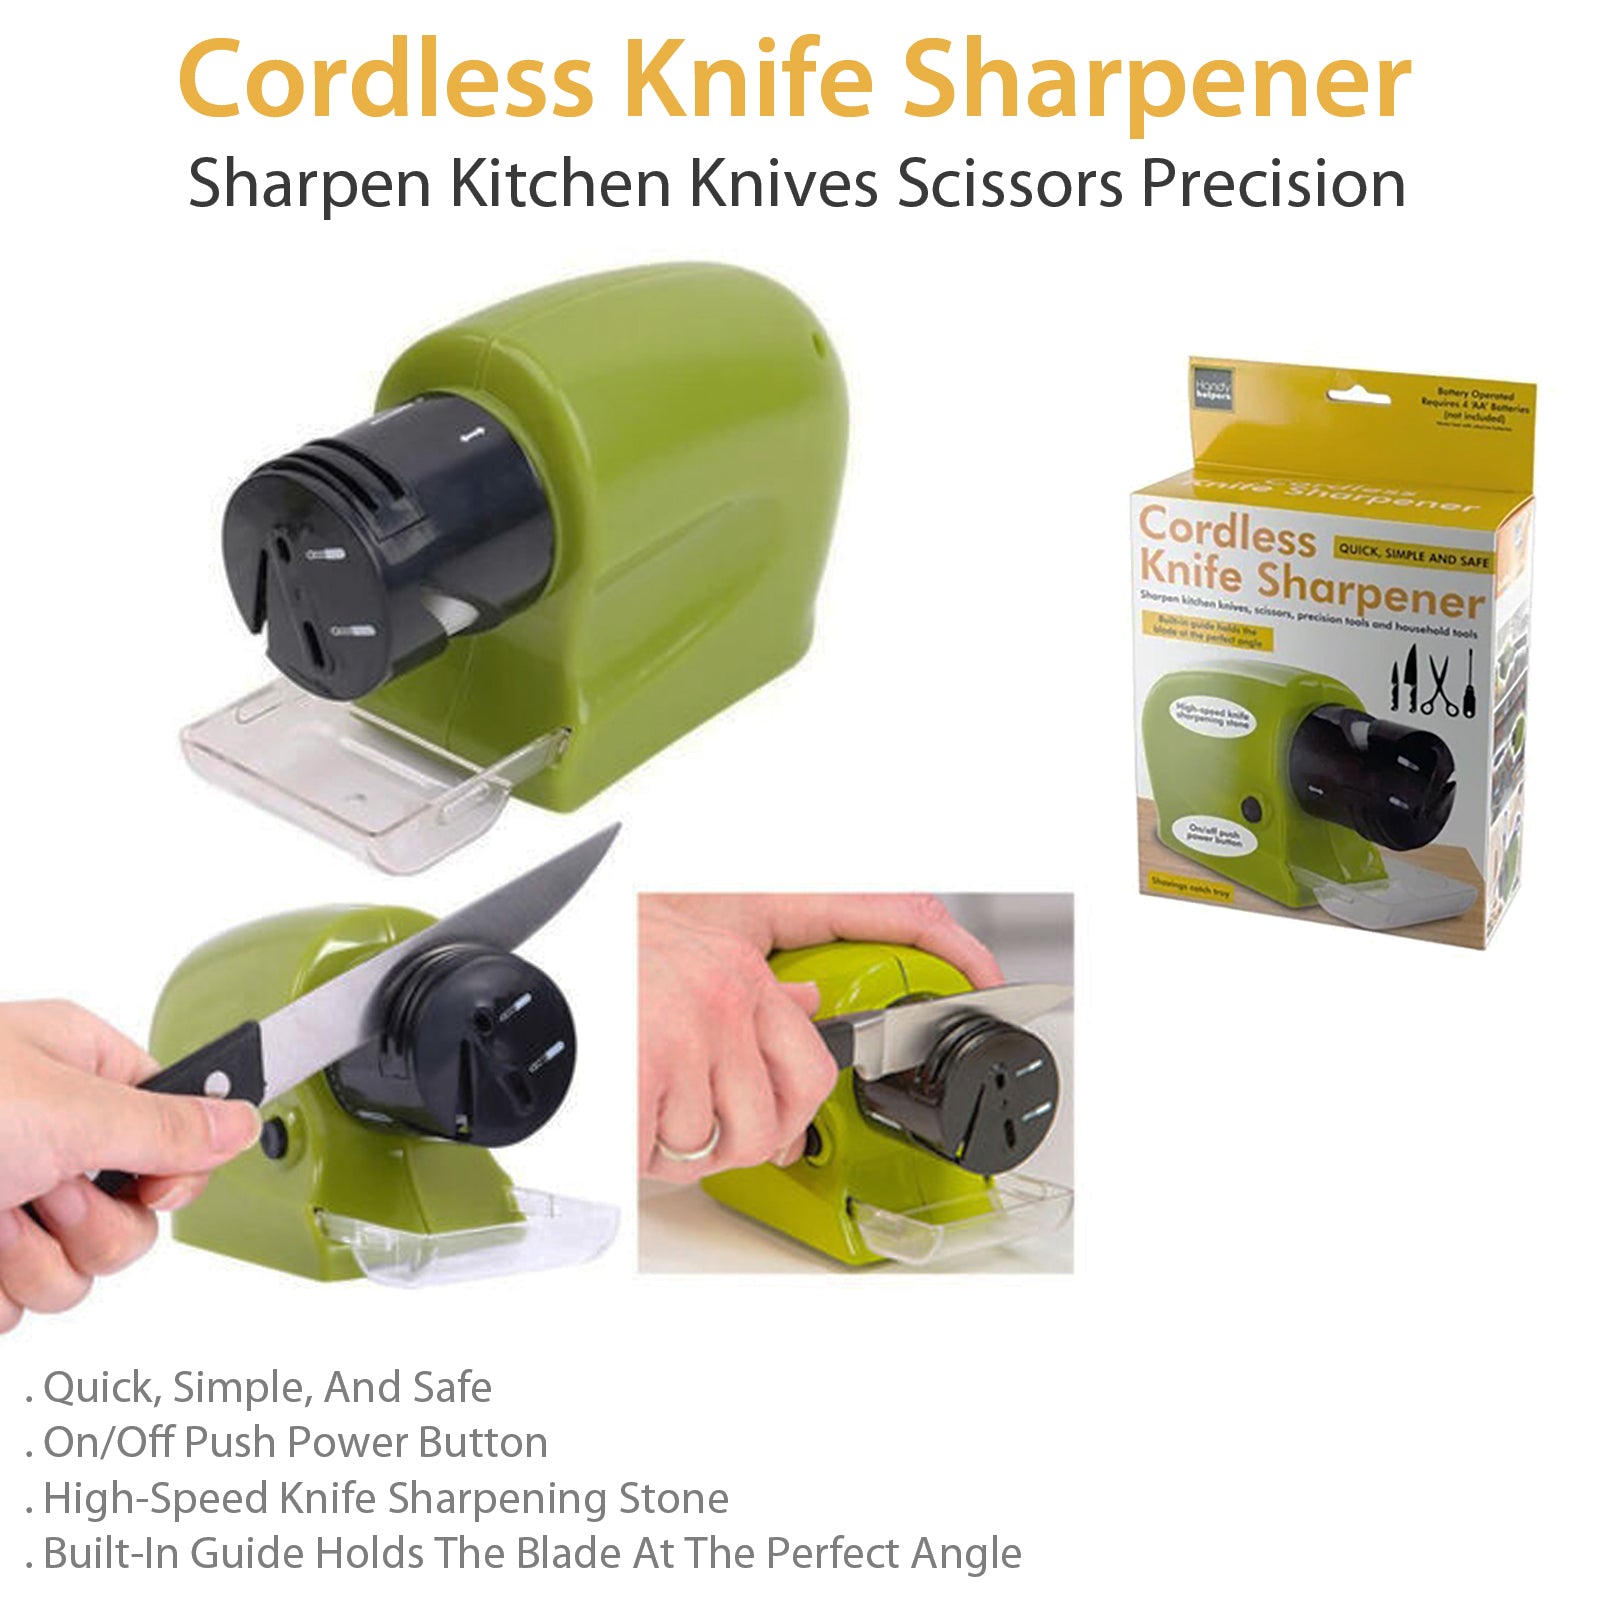 Cordless Knife Sharpener - Quick, Simple, and Safe | Handy Helpers